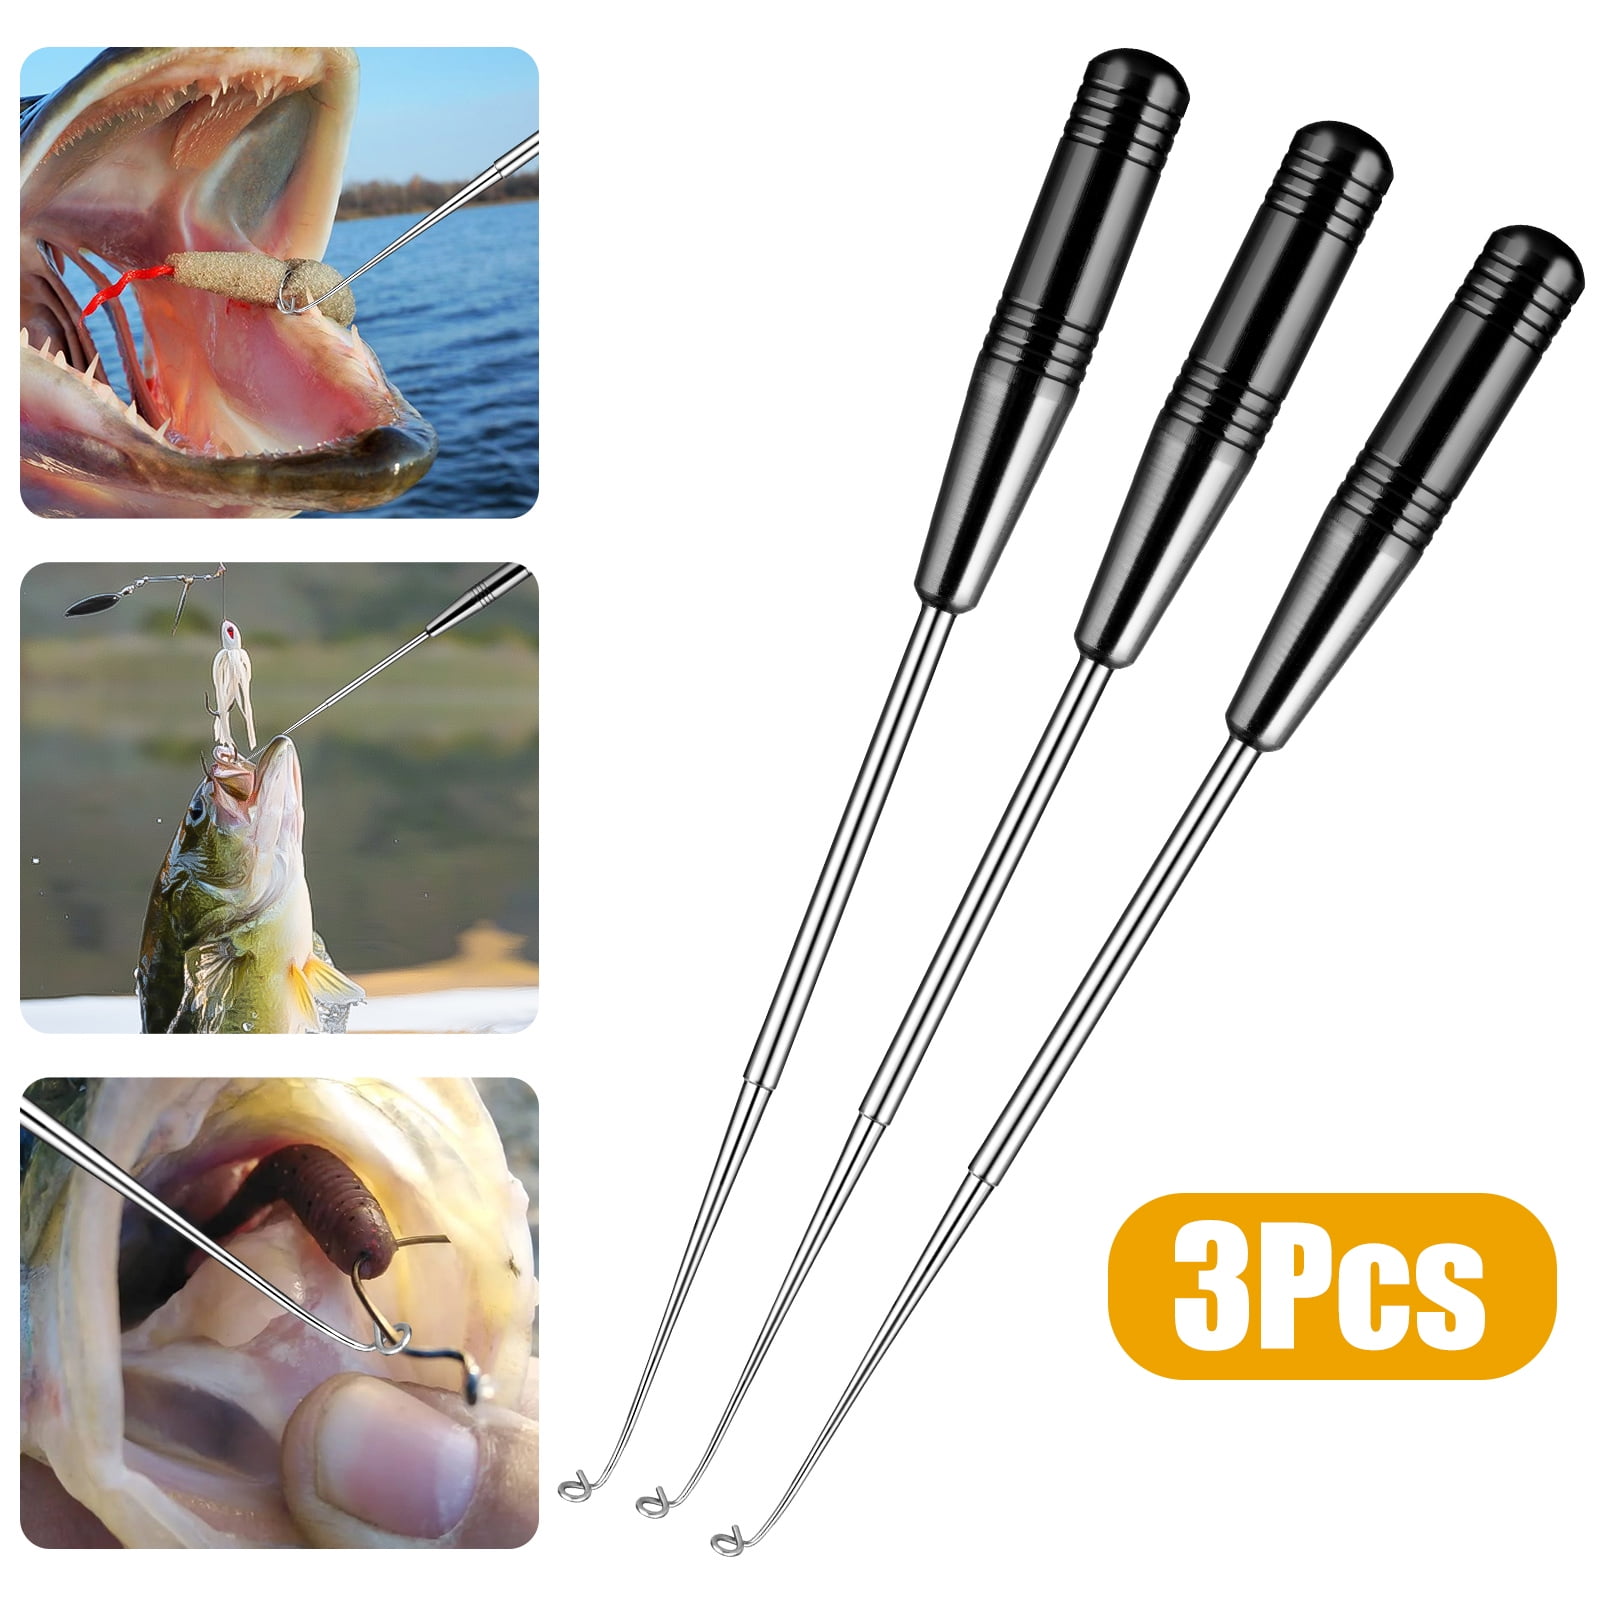 2PCS Fishing Hook Quick Removal Device Security Extractor Fish Hook Disconnect Device Fishing Accessory,Fish Hook Removal Tool for Fishing,Fish Hook Remover Tool Kit, 